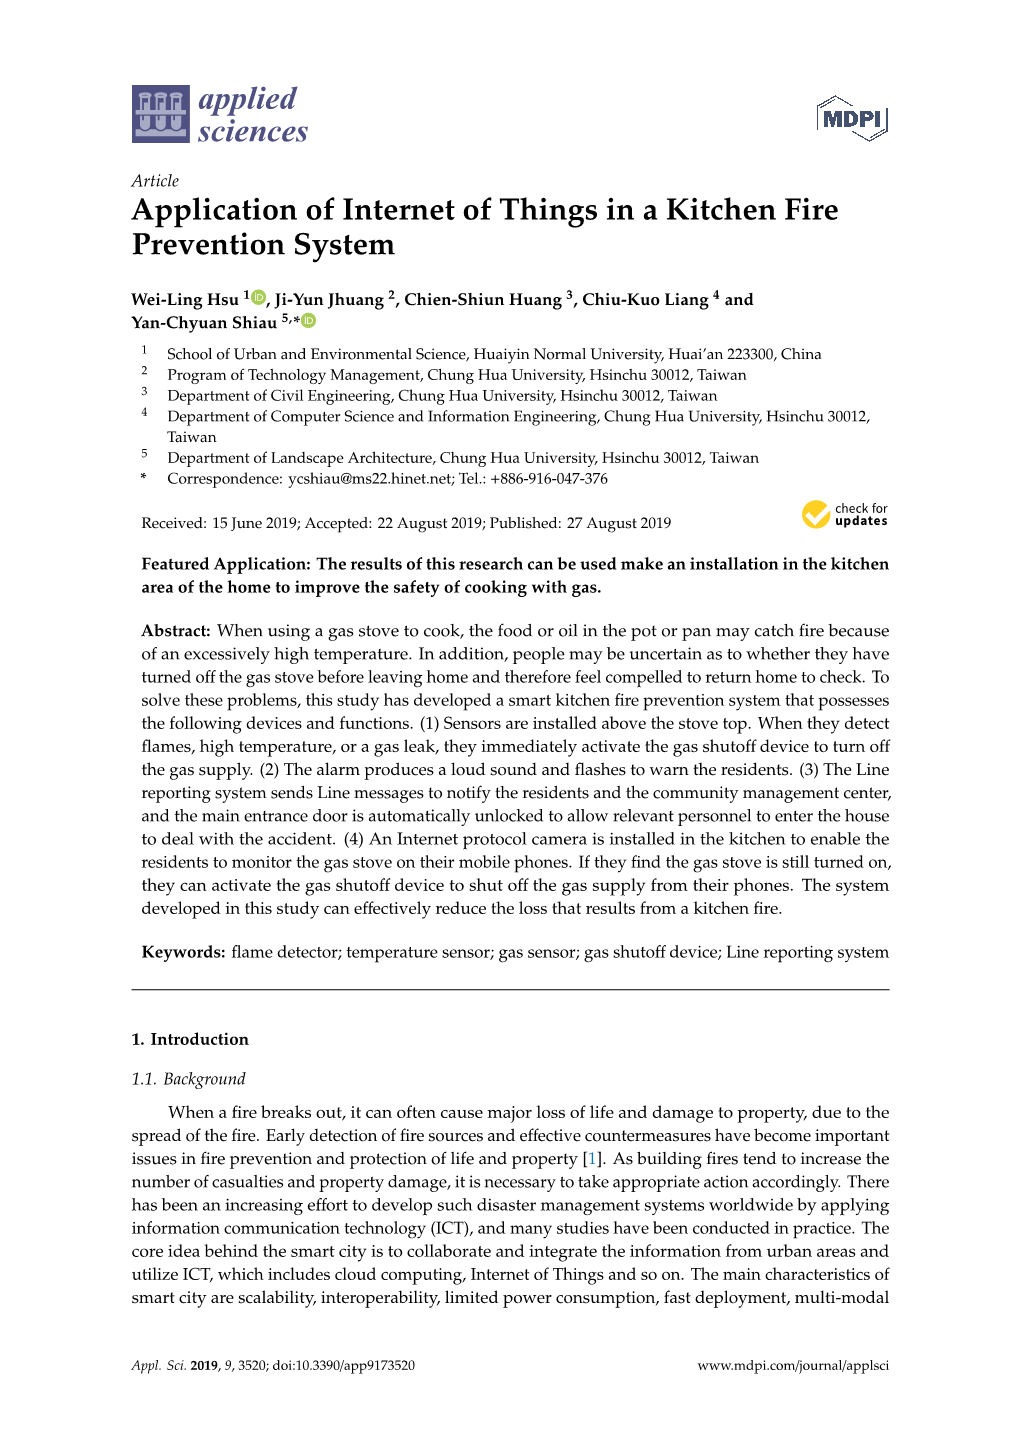 Application of Internet of Things in a Kitchen Fire Prevention System